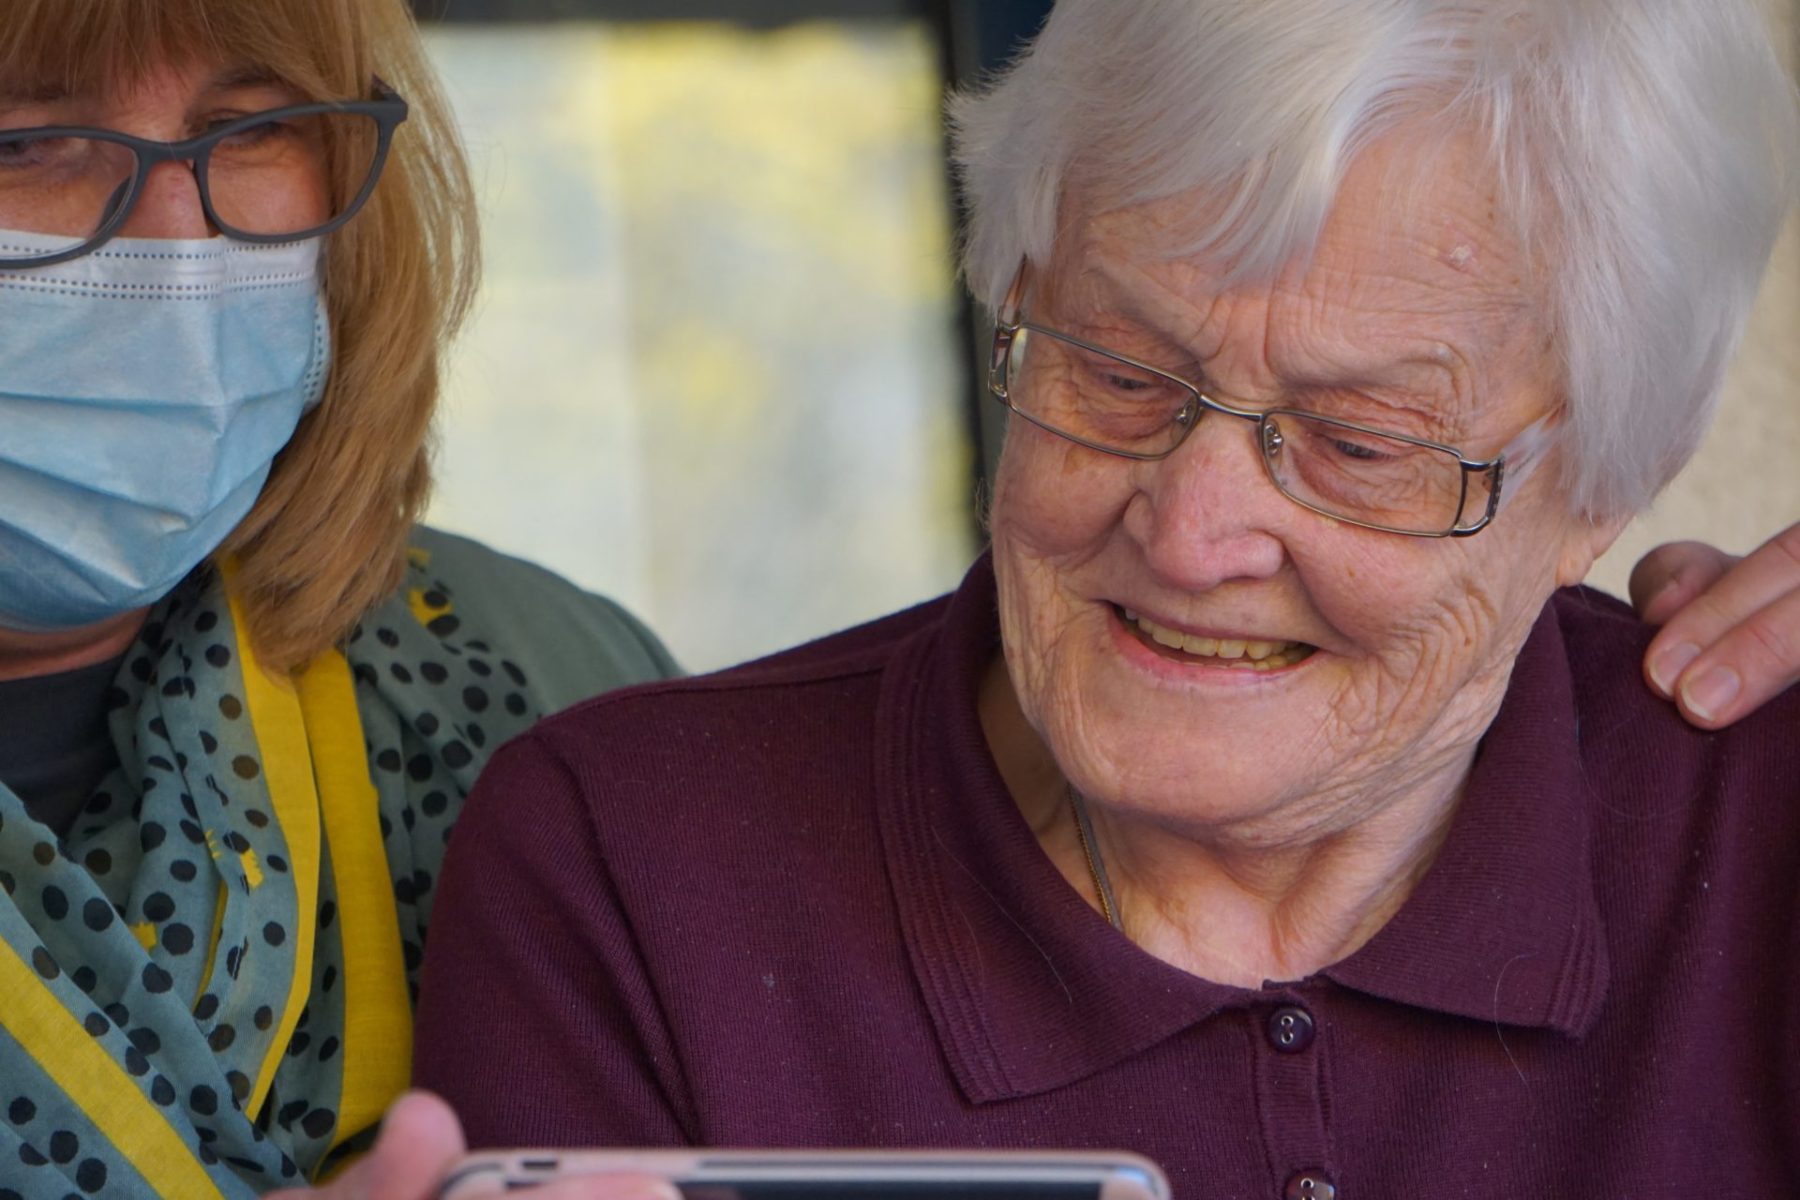  woman showing phone to older woman